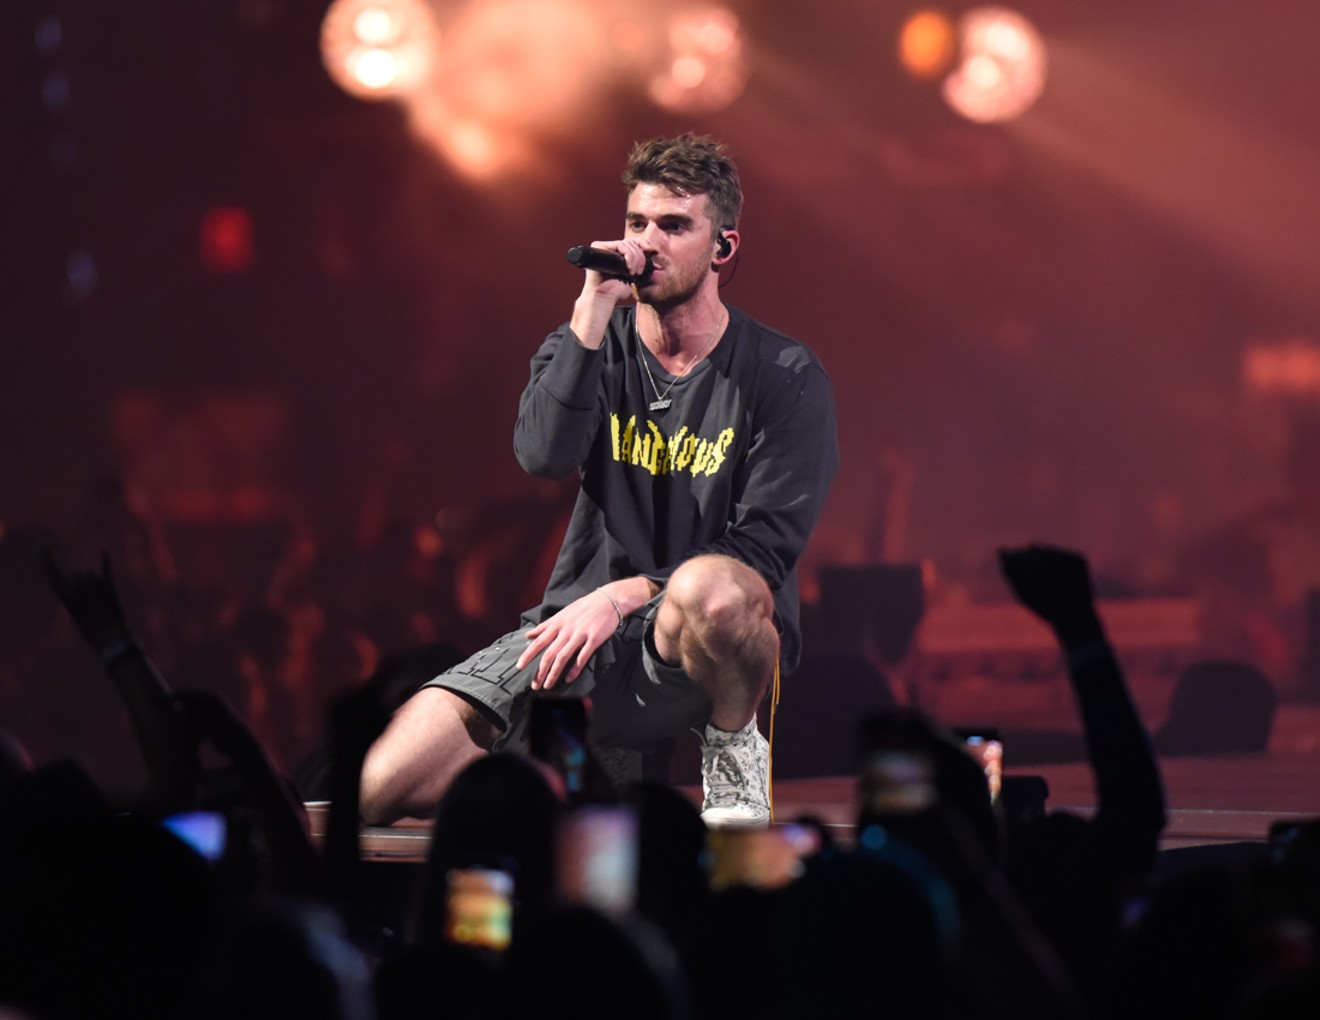 Drew Taggart of the Chainsmokers at the American Airlines Arena. See more photos of the Chainsmokers' Miami concert here.